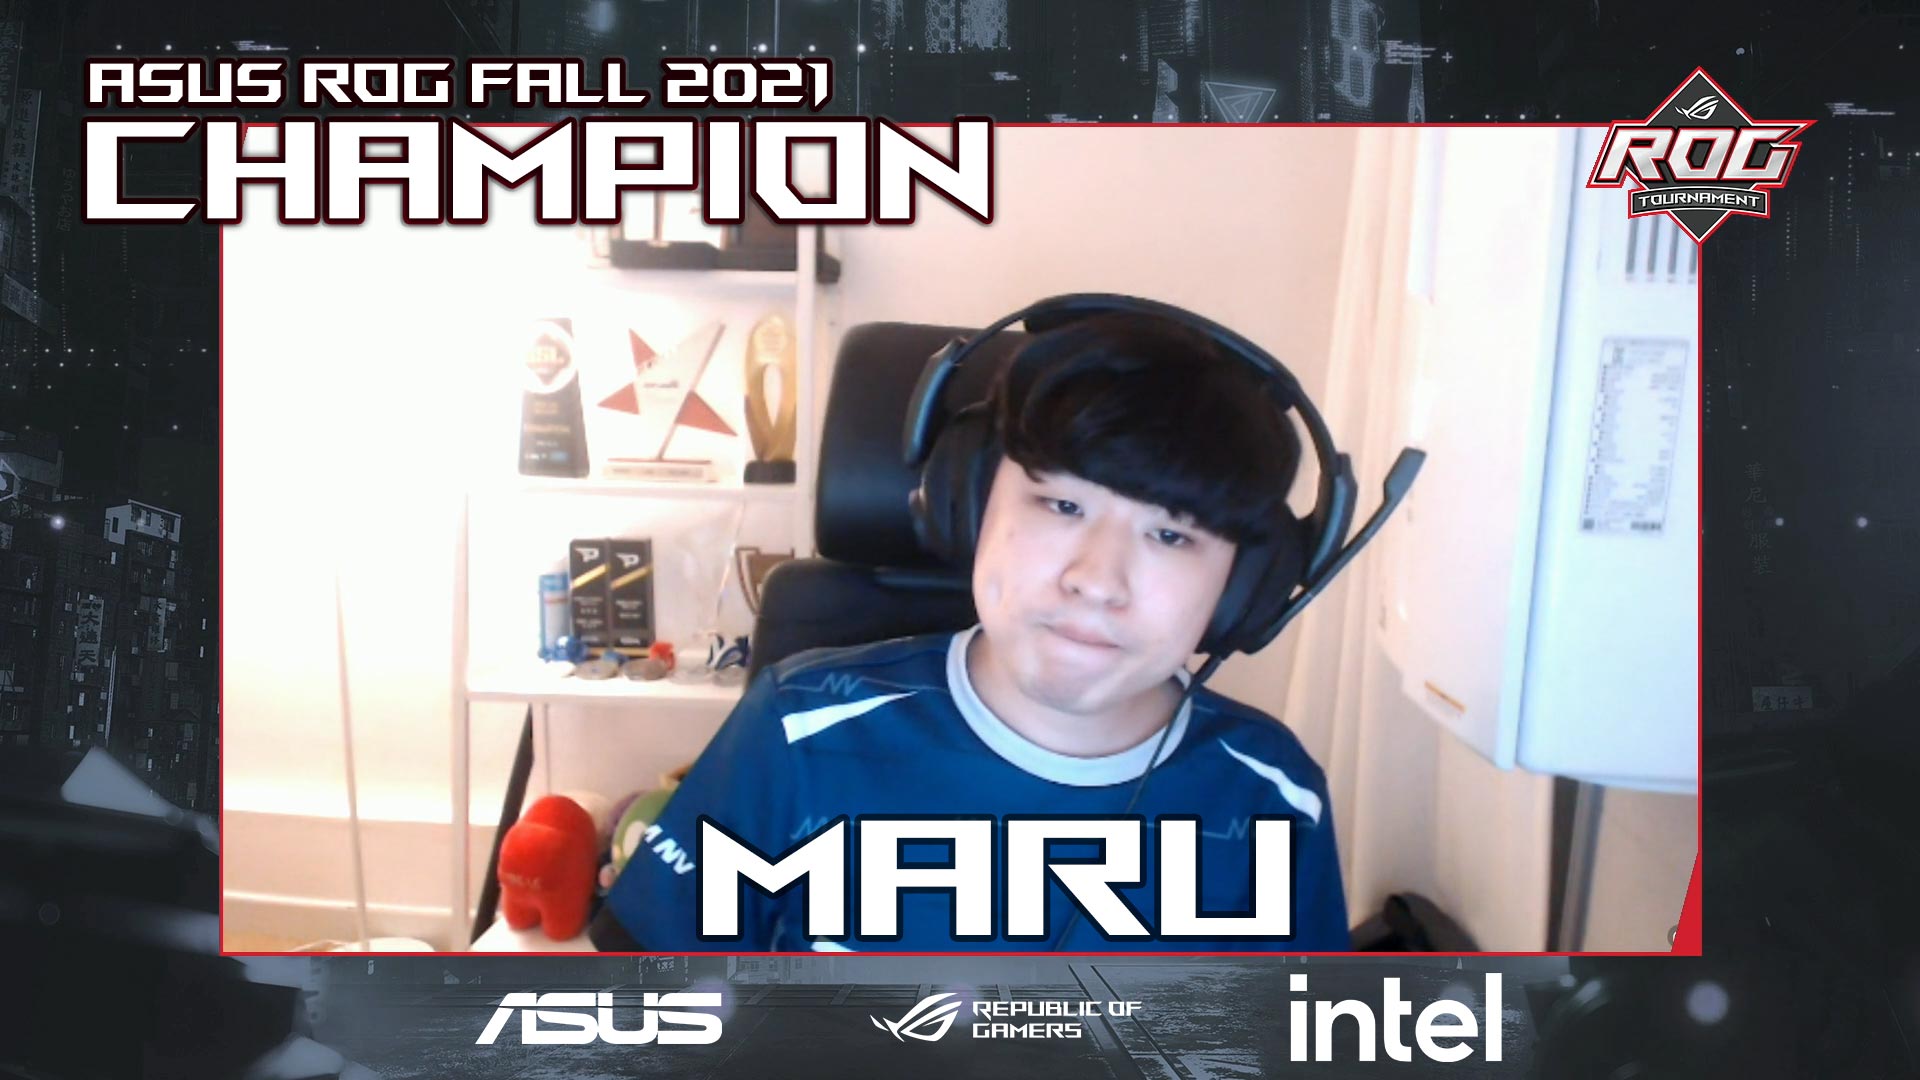 procedure Fremskynde i stedet ASUS ROG Tournaments on Twitter: "MARU IS ASUS ROG FALL 2021 CHAMPION!  Congratulations! He beats Rogue in the final 4-2 and manages to claim his  first ever ASUS ROG trophy. Amazing tournament